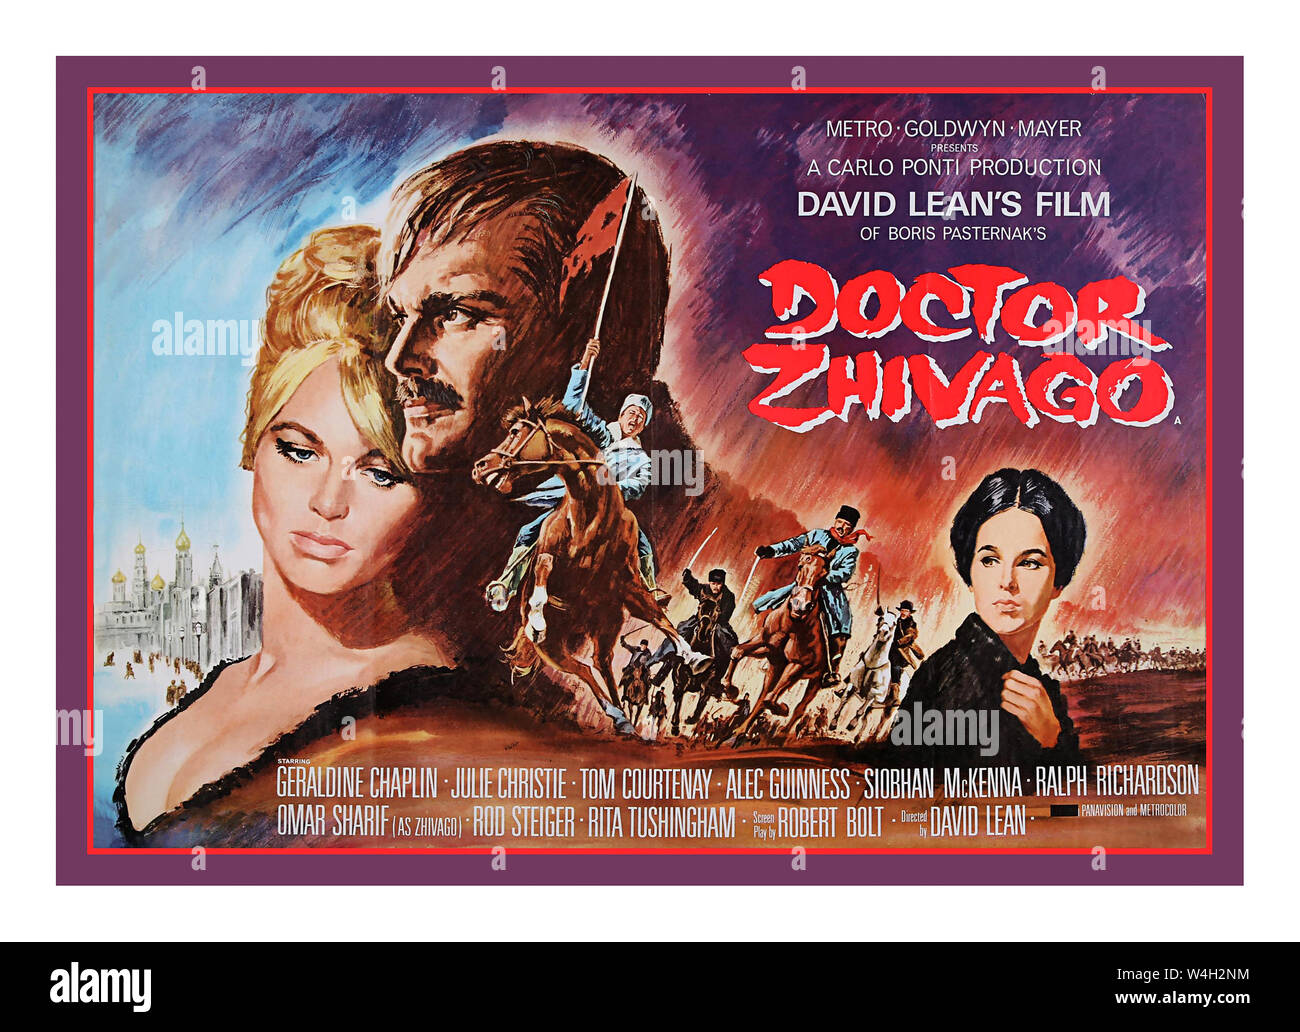 'Doctor Zhivago' first release movie film cinema poster for the 1965 epic 'Doctor Zhivago'. Directed by David Lean, the film starred Julie Christie and Omar Sharif. This was one of the biggest films of 1965, feted with ten Oscar nominations, scooping five. Doctor Zhivago is a 1965 British-Italian epic romantic drama film directed by David Lean. It is set in Russia between the years prior to World War I and the Russian Civil War of 1917–1922, and is based on the 1957 Boris Pasternak novel Doctor Zhivago. While immensely popular in the West, the book was banned in the Soviet Union for decades. Stock Photo